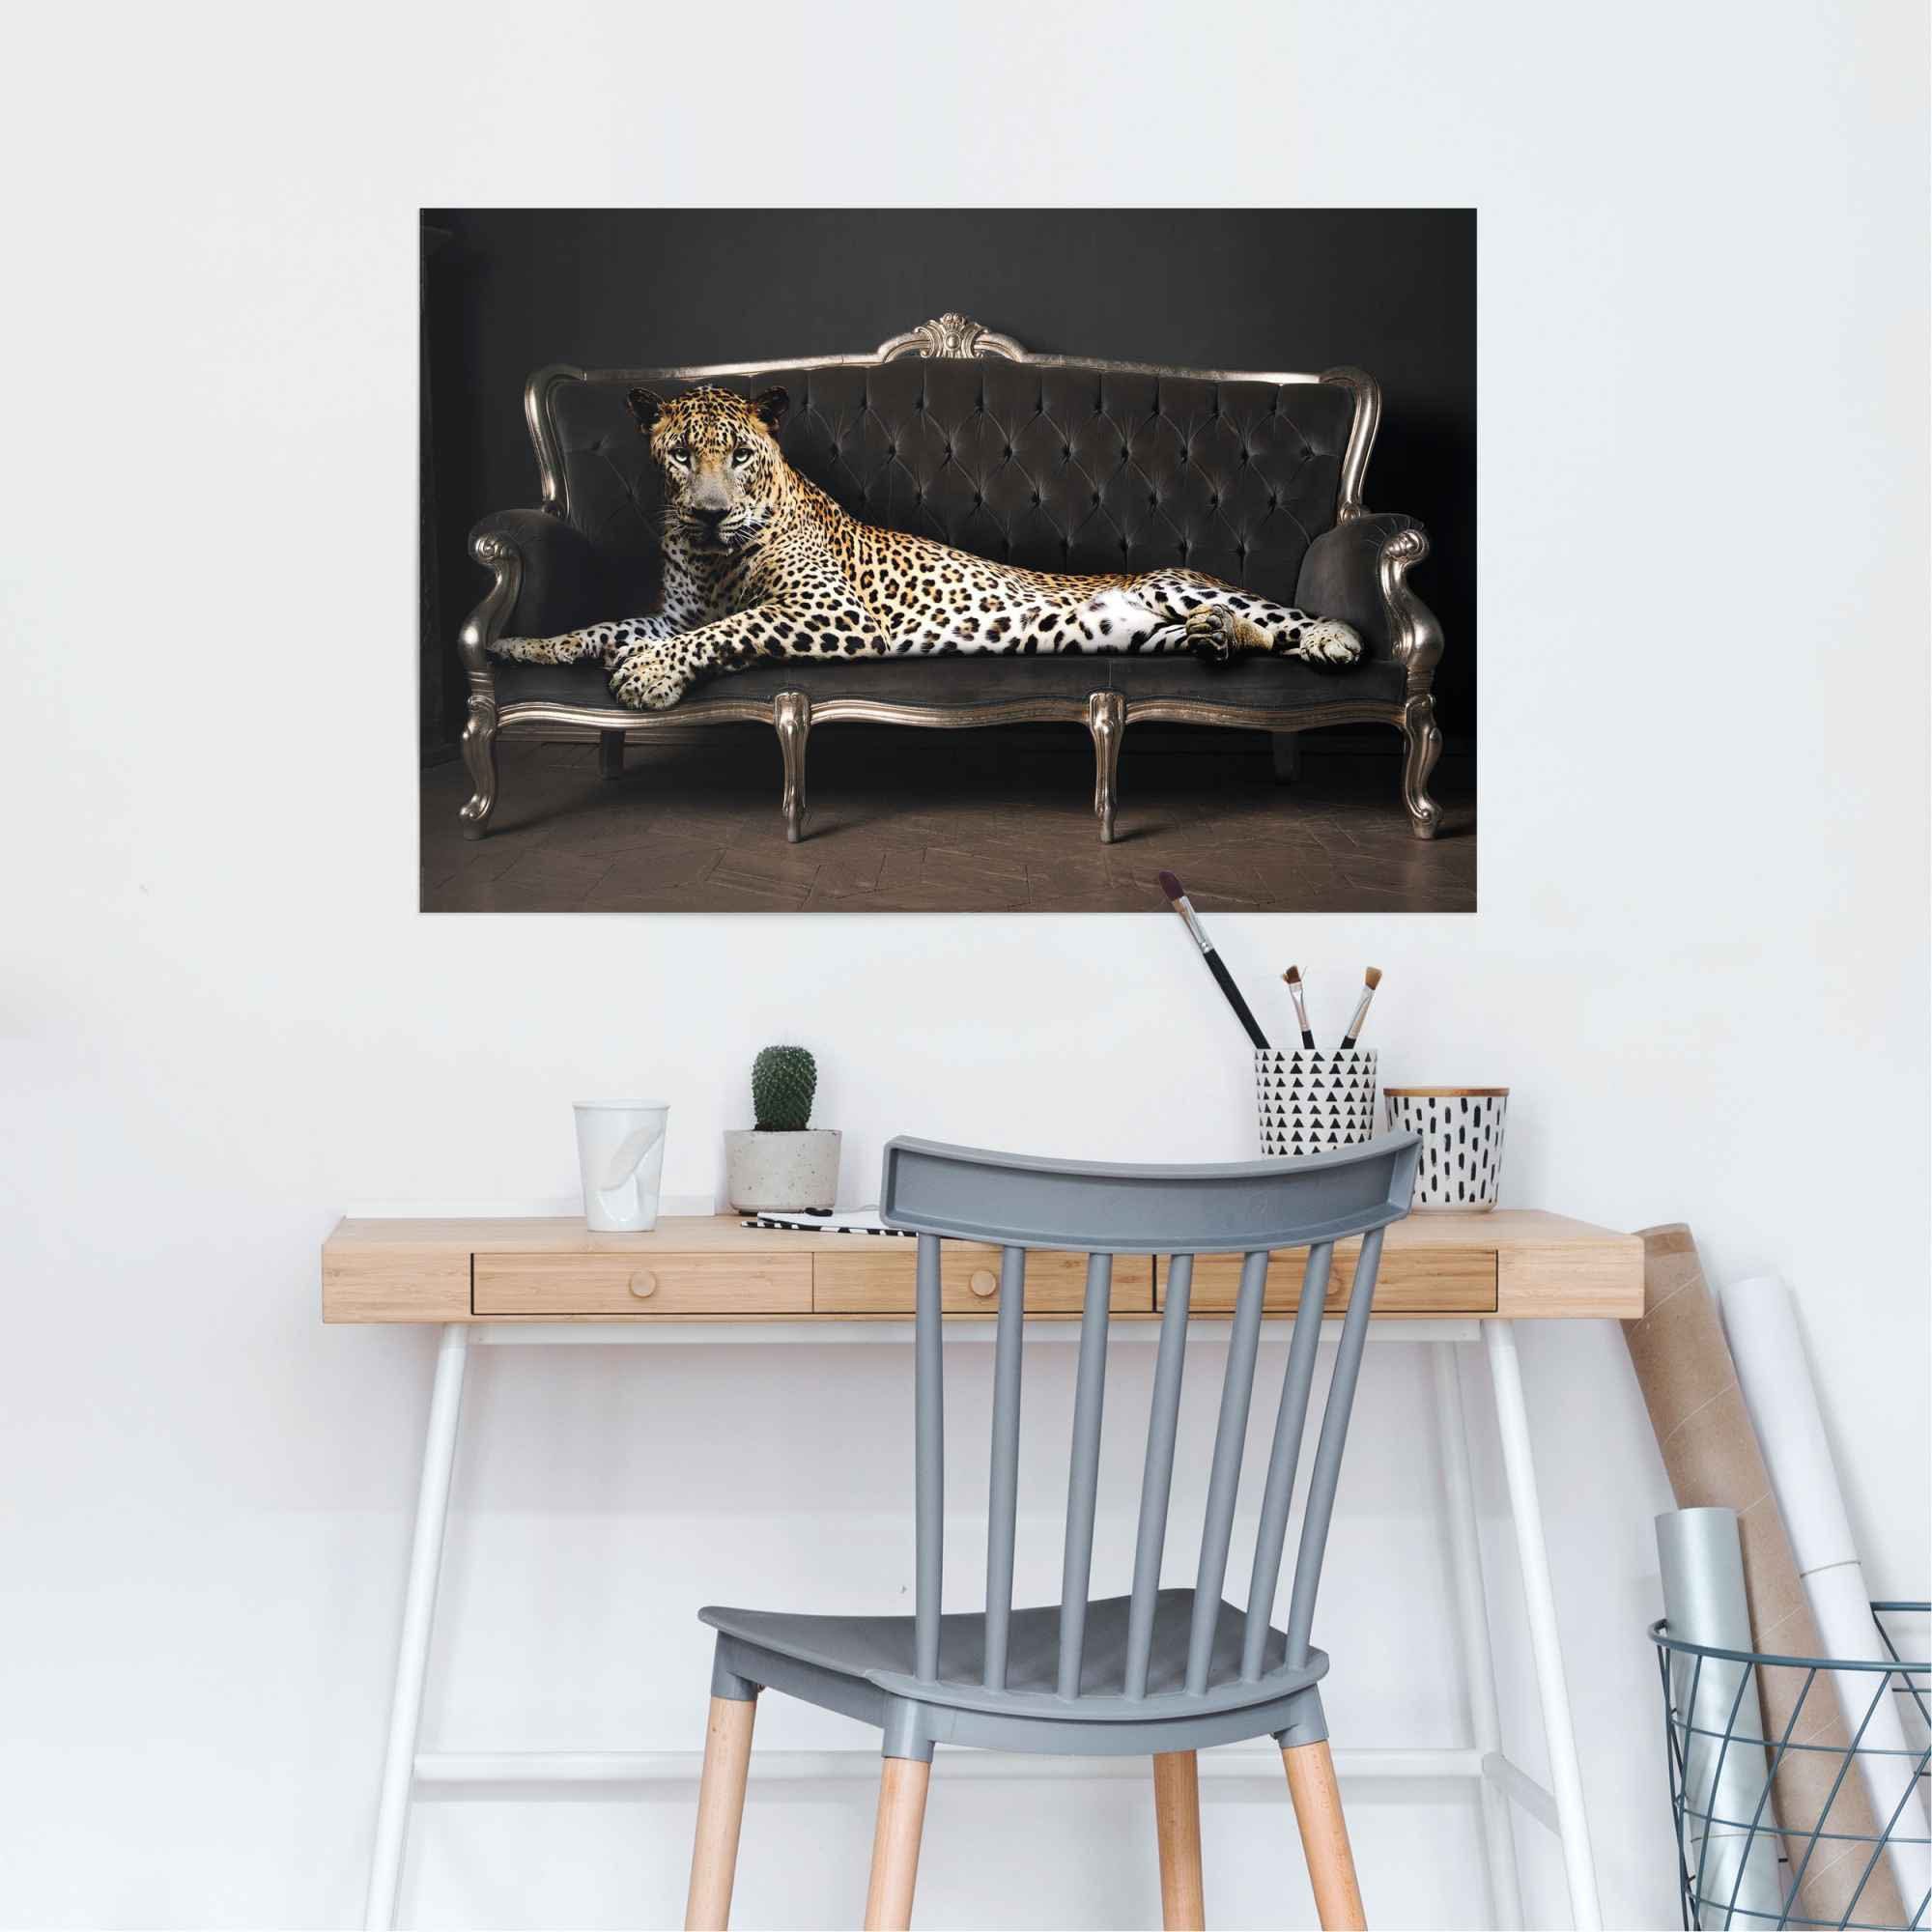 Panther - Liegend Reinders! Luxus Chic - St) (1 - Leopard Relax, Poster